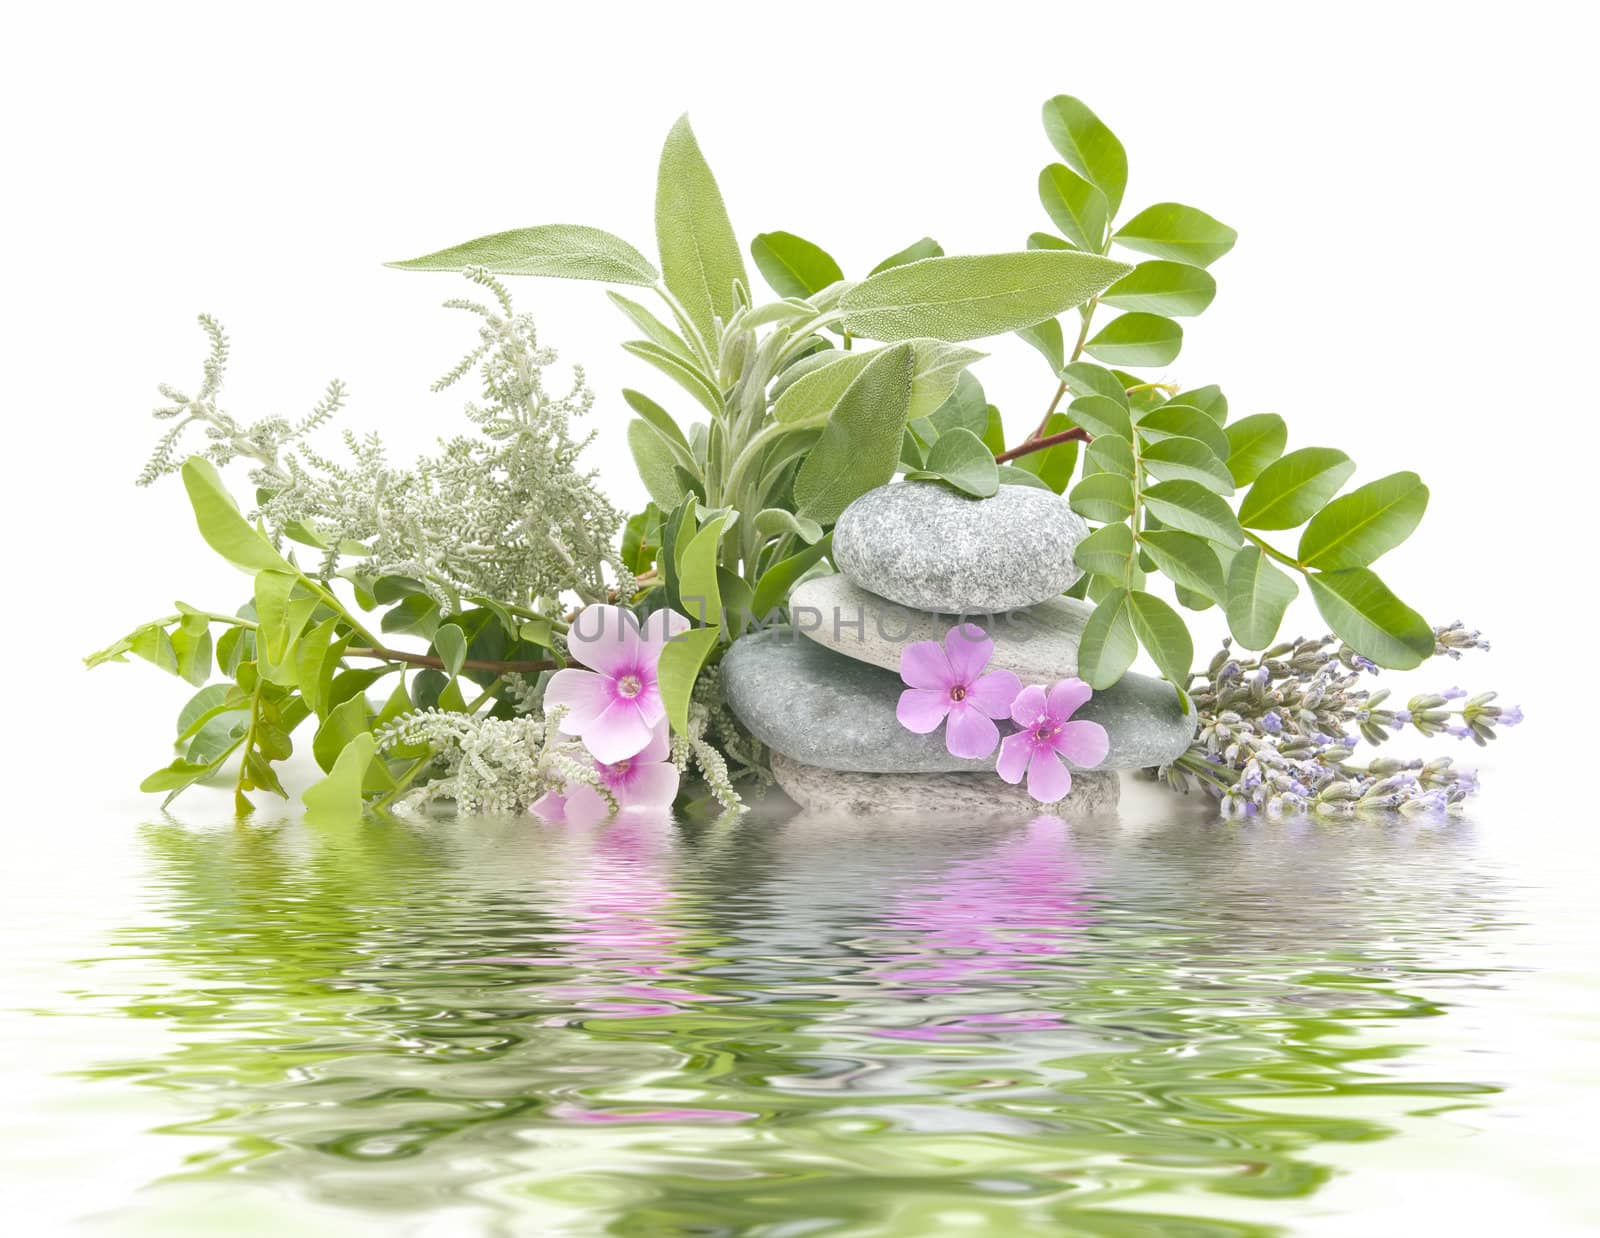 spa treatment with natural herbs and essences
